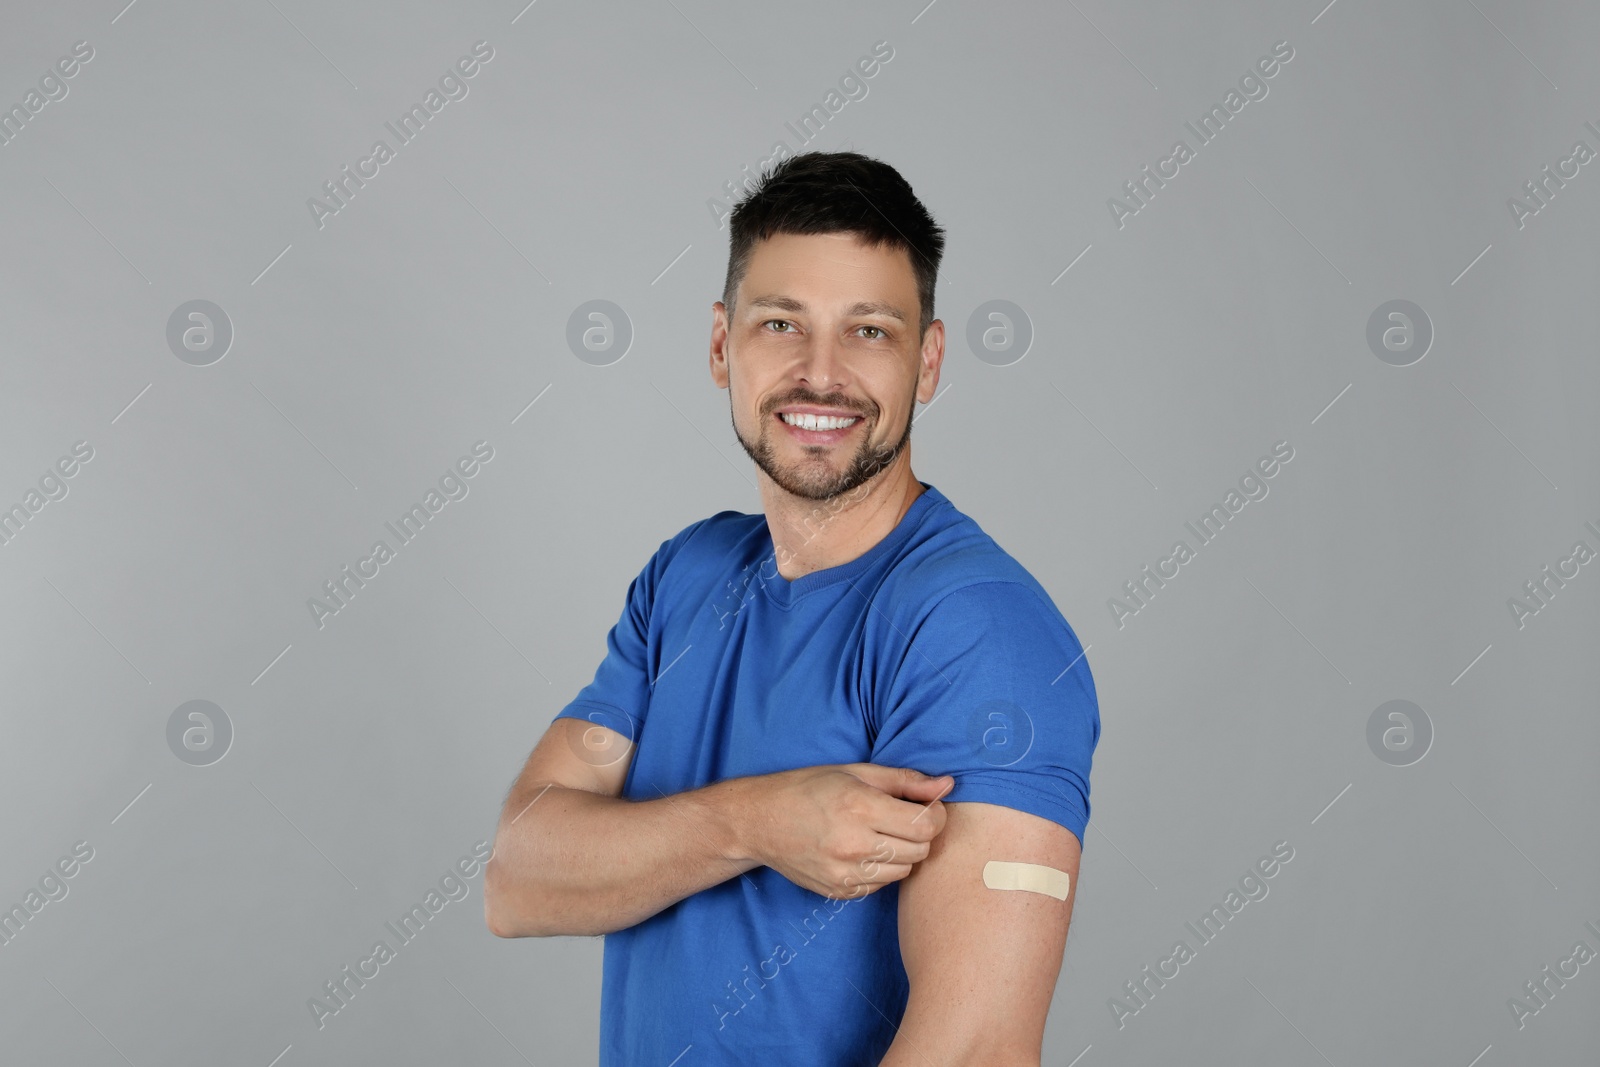 Photo of Vaccinated man with medical plaster on his arm against grey background